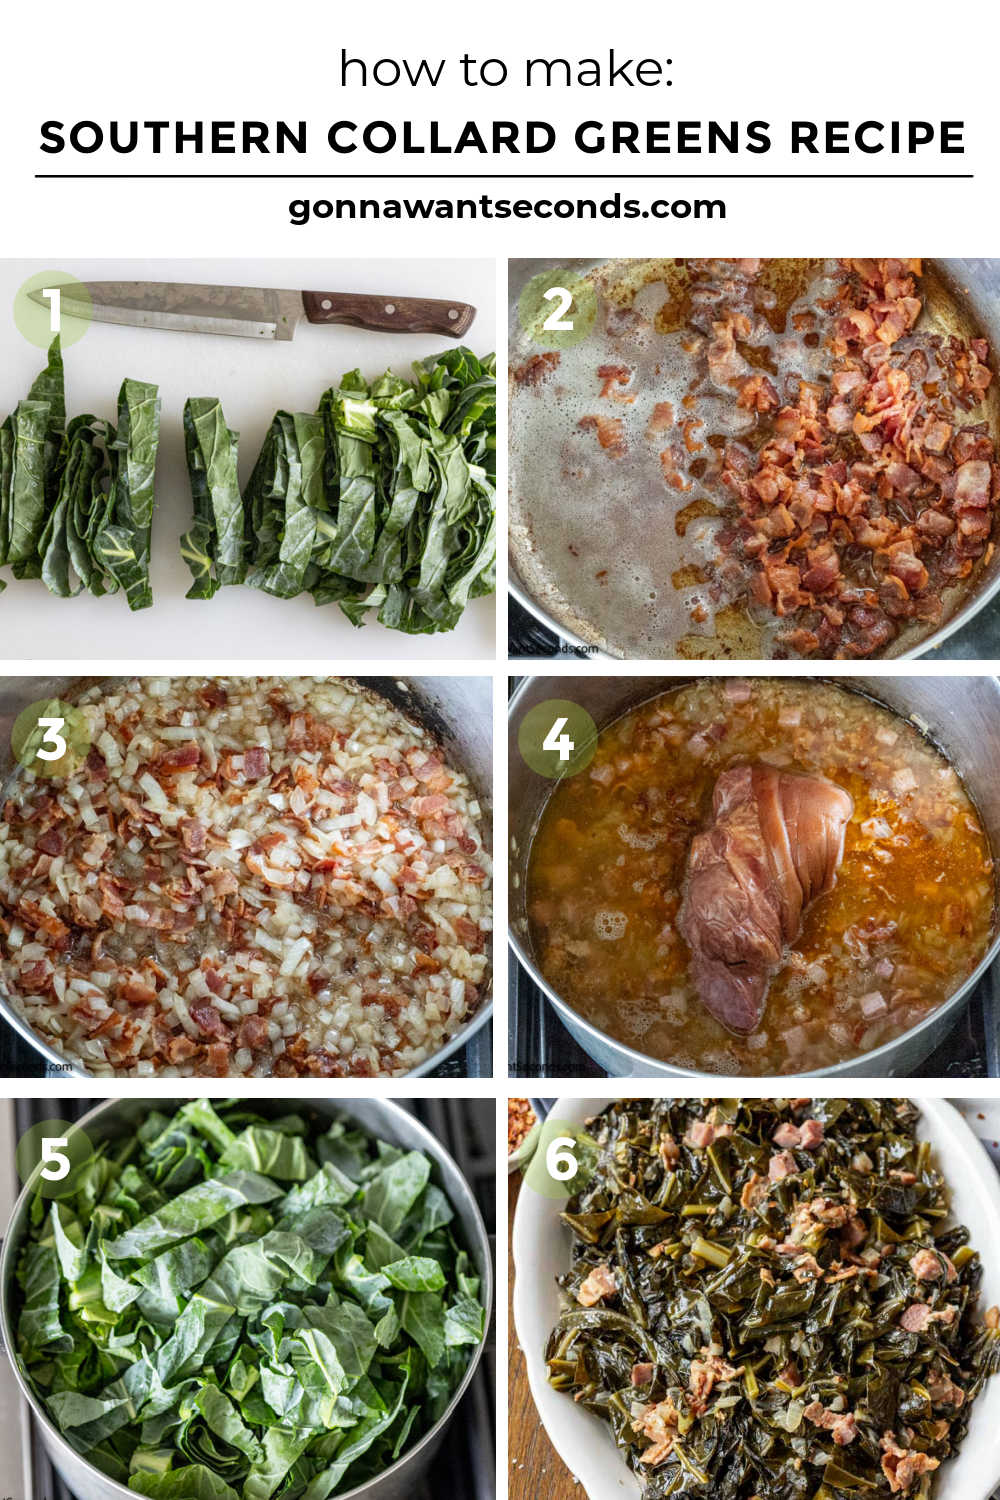 Step by step how to make southern collard greens recipe